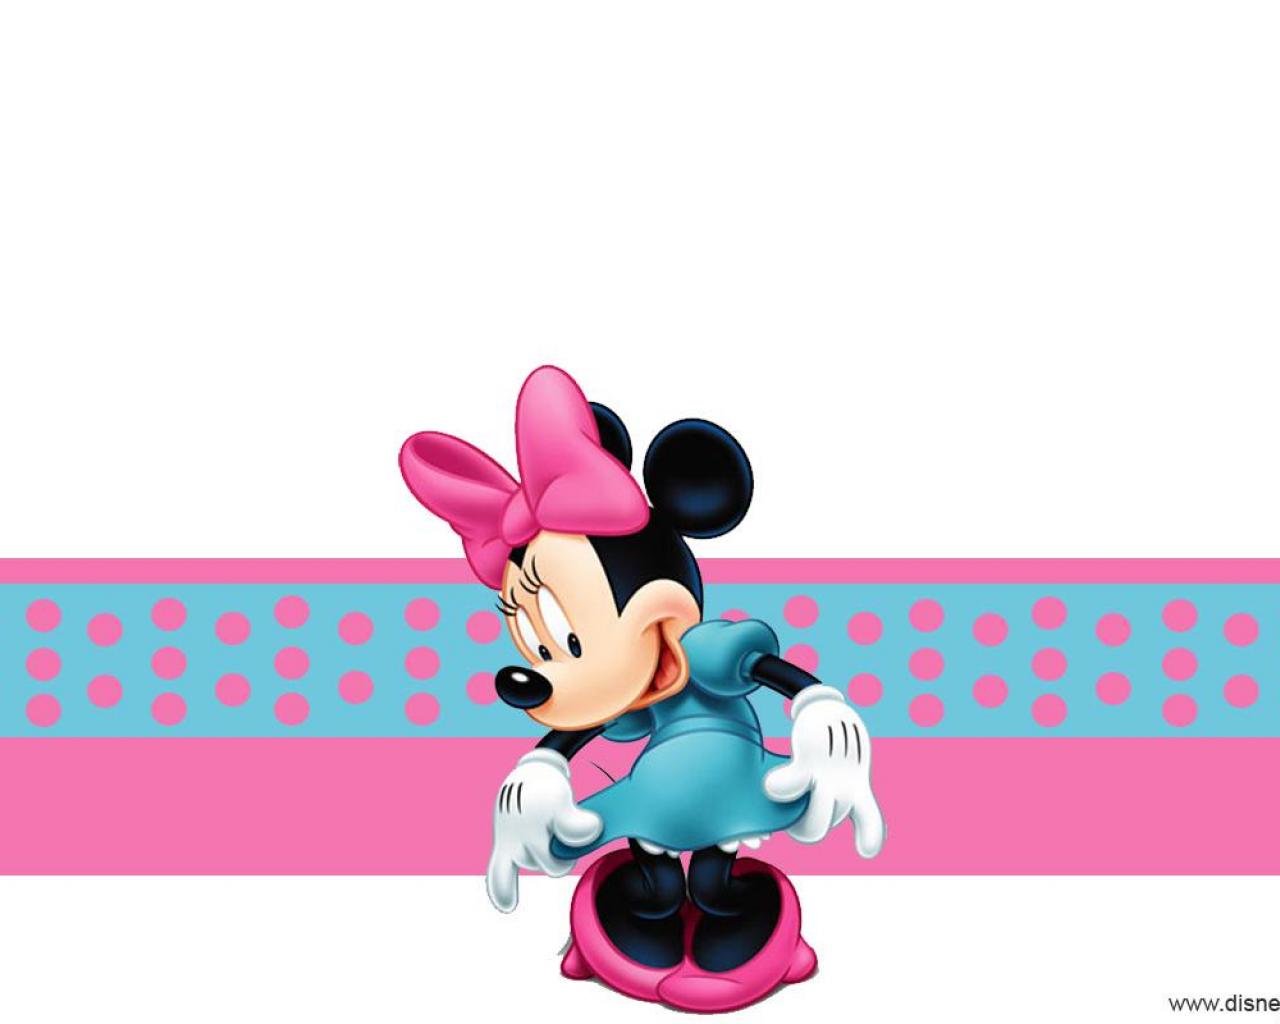 Wallpaper Minnie Mouse Atpeek Search Engine